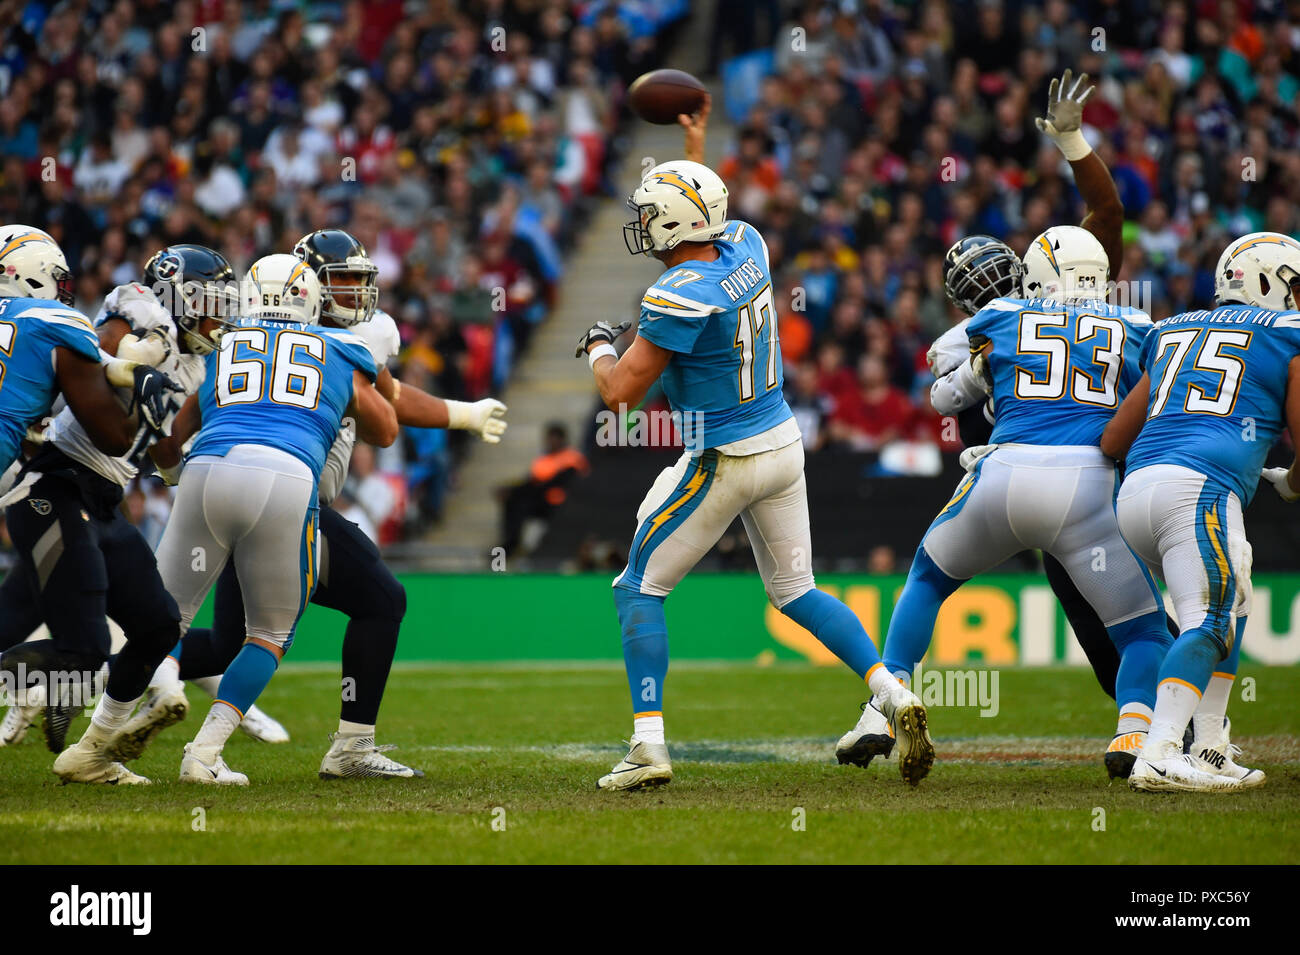 London, UK.  21 October 2018. Quarterback Philip Rivers (17) of the Chargers throws a pass. Tennessee Titans at Los Angeles Chargers NFL game at Wembley Stadium, the second of the NFL London 2018 games. Final score - Chargers 20 Titans 19.  Credit: Stephen Chung / Alamy Live News Stock Photo